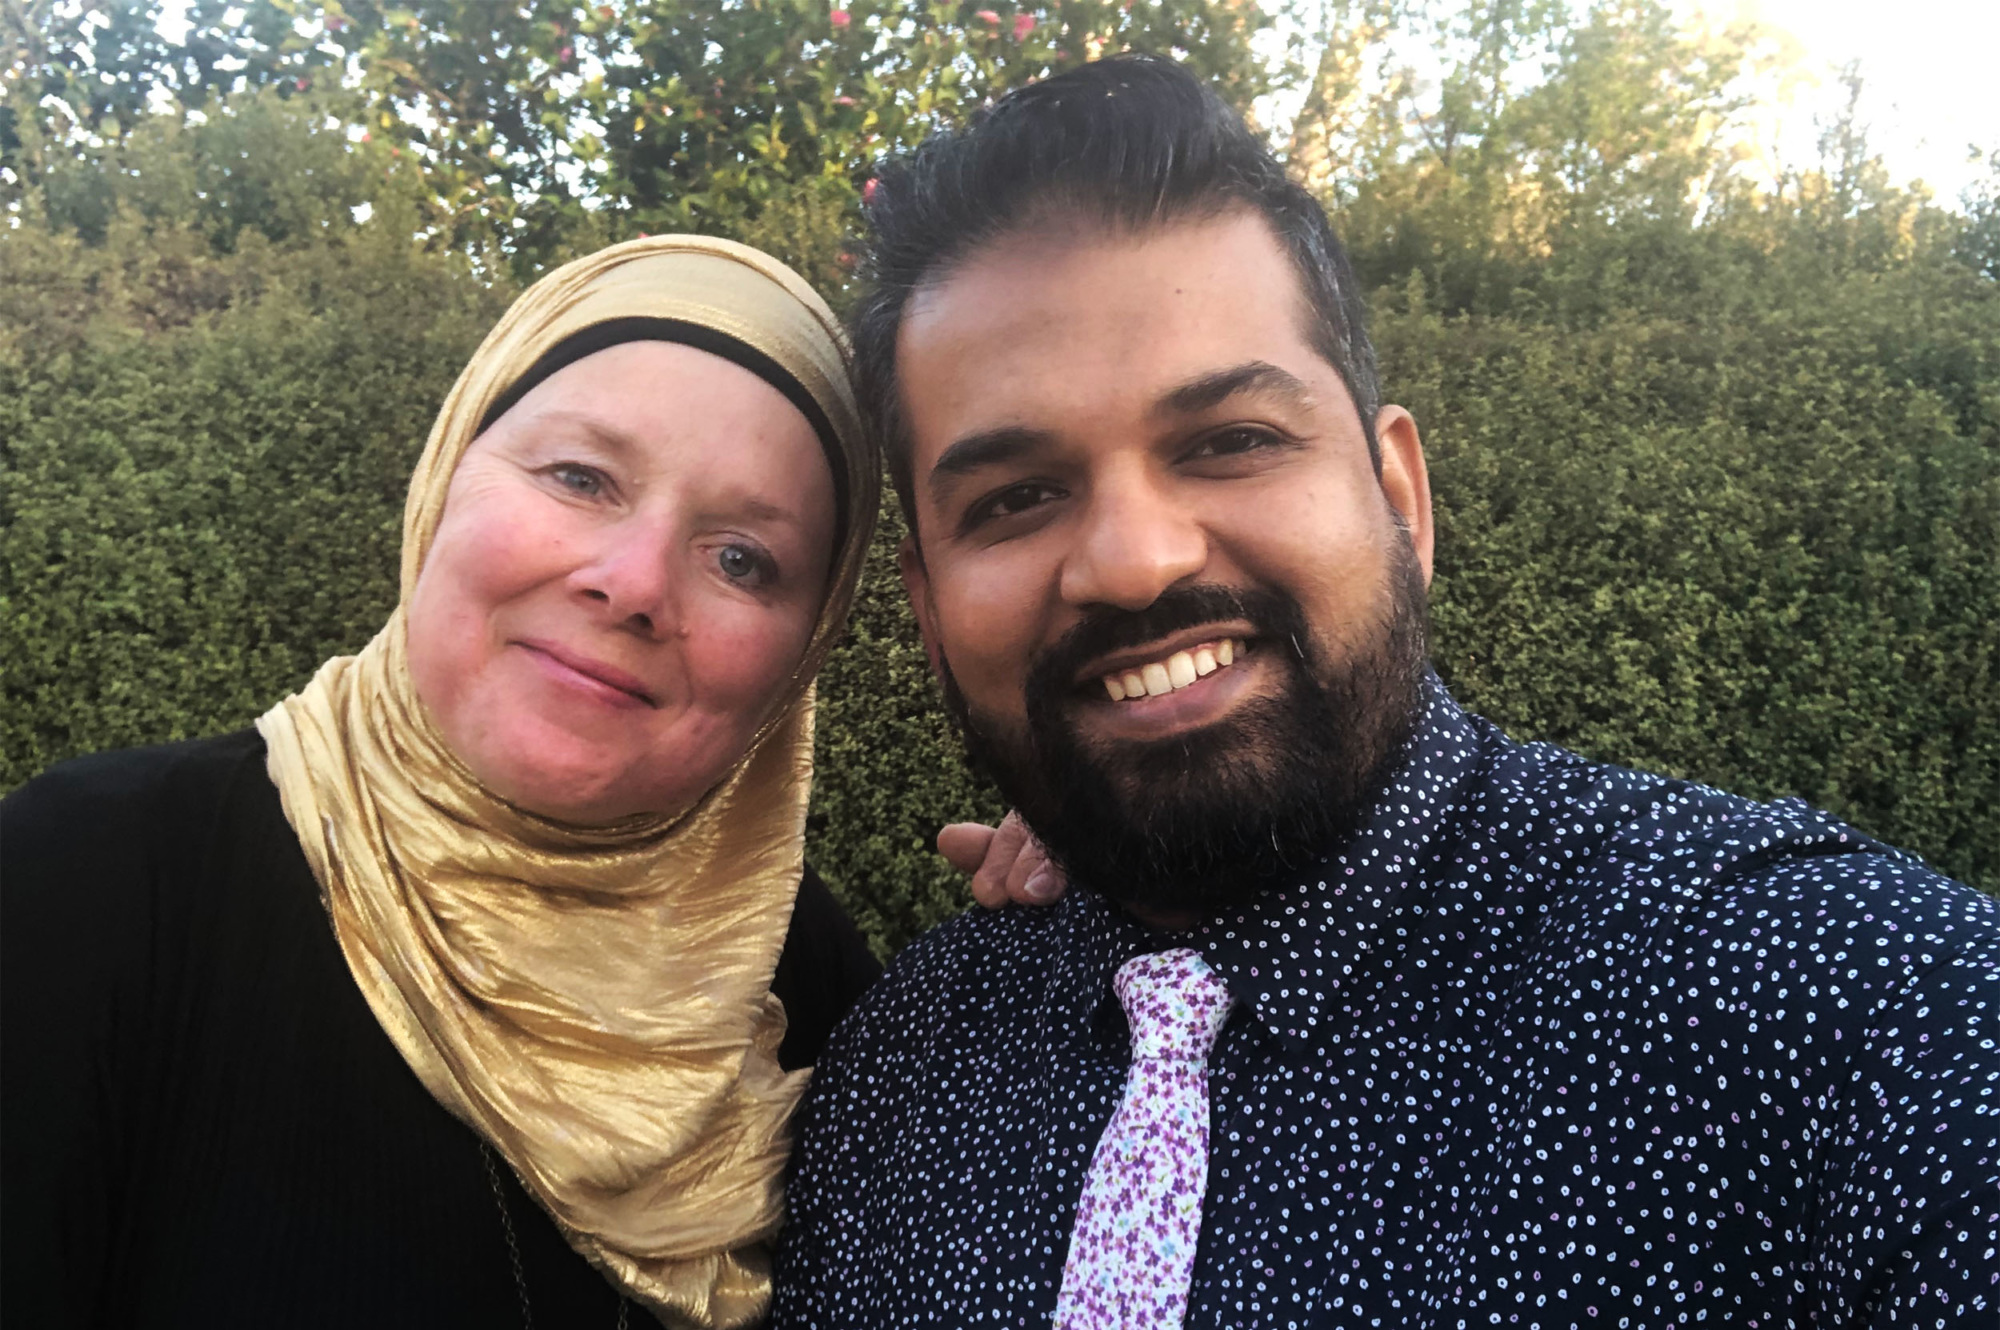 A woman wearing a hijab and a man in a flowered shirt and tie smile at the camera